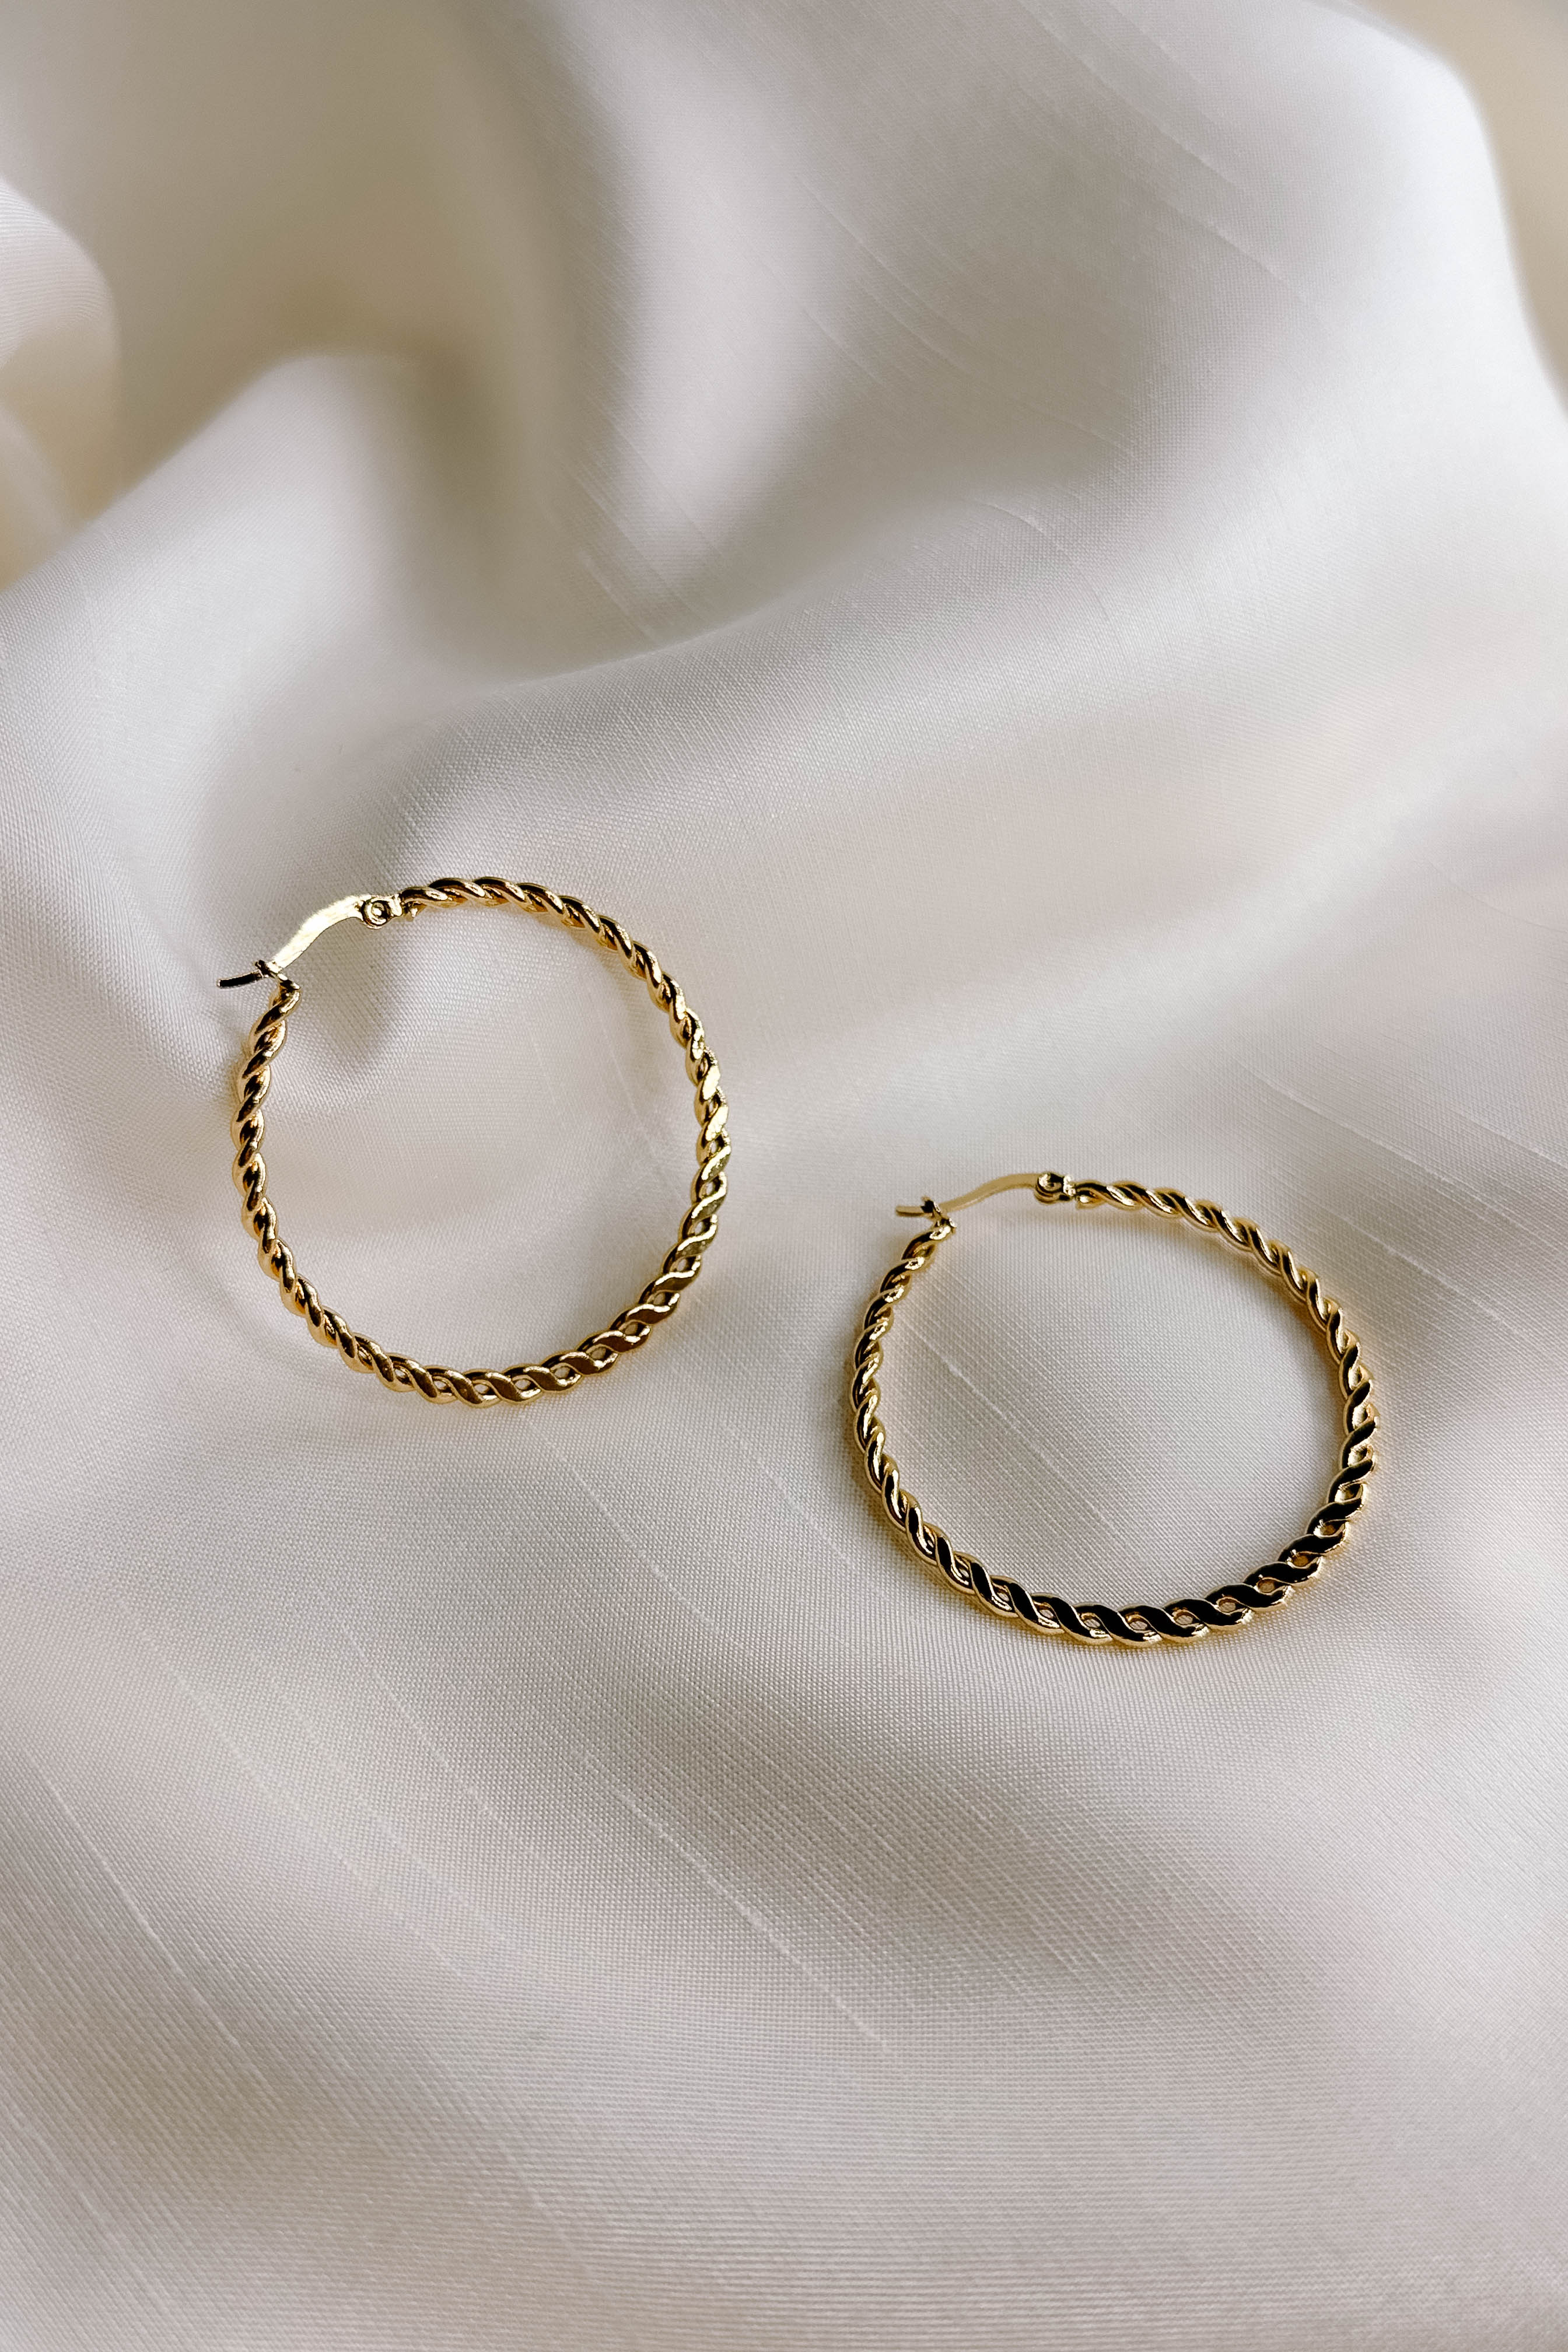 Top view of the Reese Gold Rope Hoop Earrings that feature medium closed hoops with a gold rope design and latch closures, shown against a cream fabric.